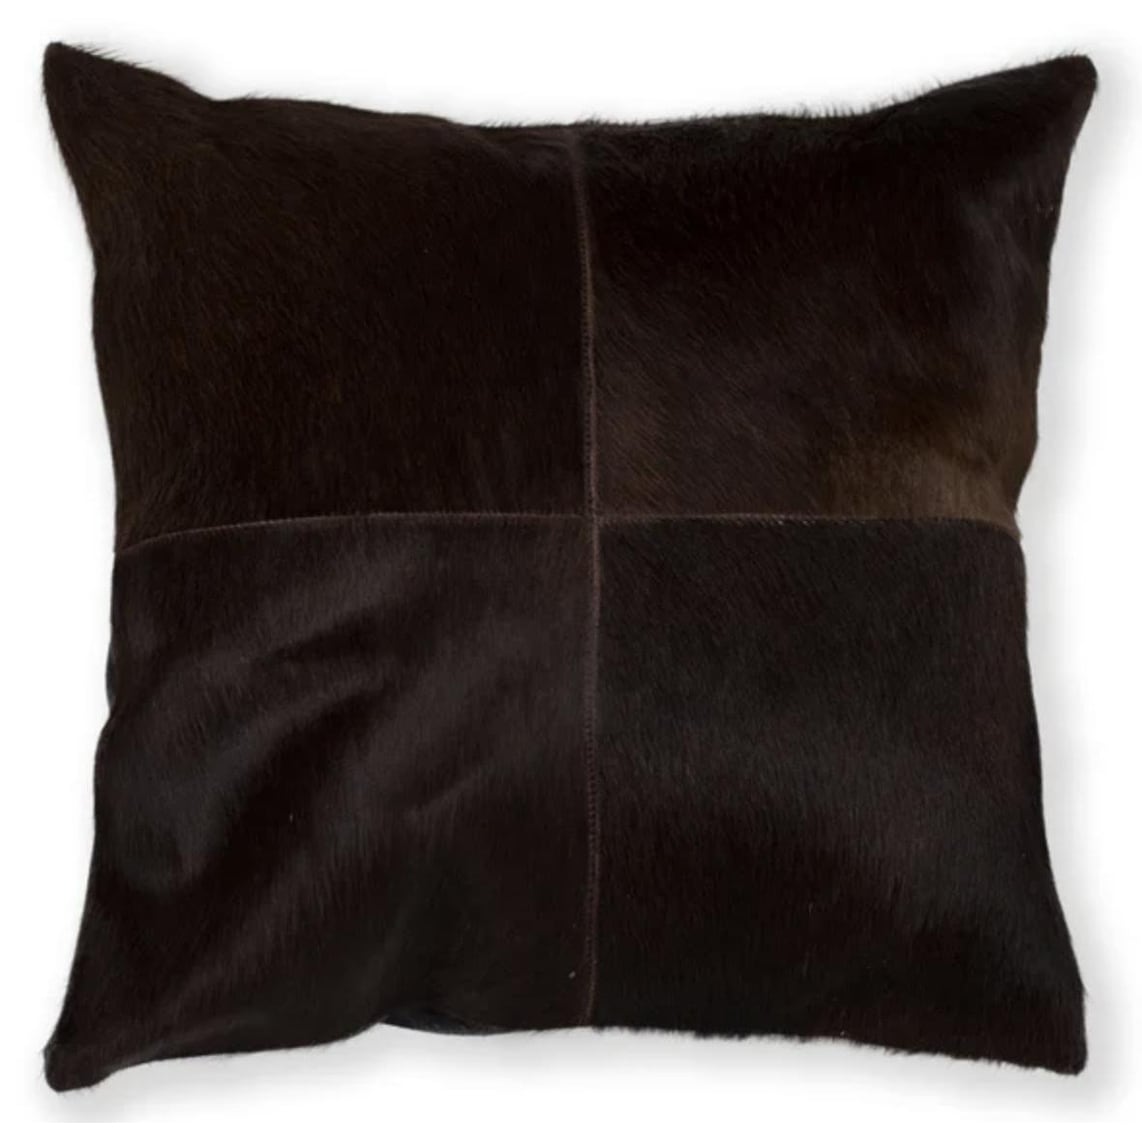 https://ak1.ostkcdn.com/images/products/is/images/direct/715b43cc23665d6d056e7e90944e8d59b5c13f88/Torino-Quatro-Large-Pillow.jpg